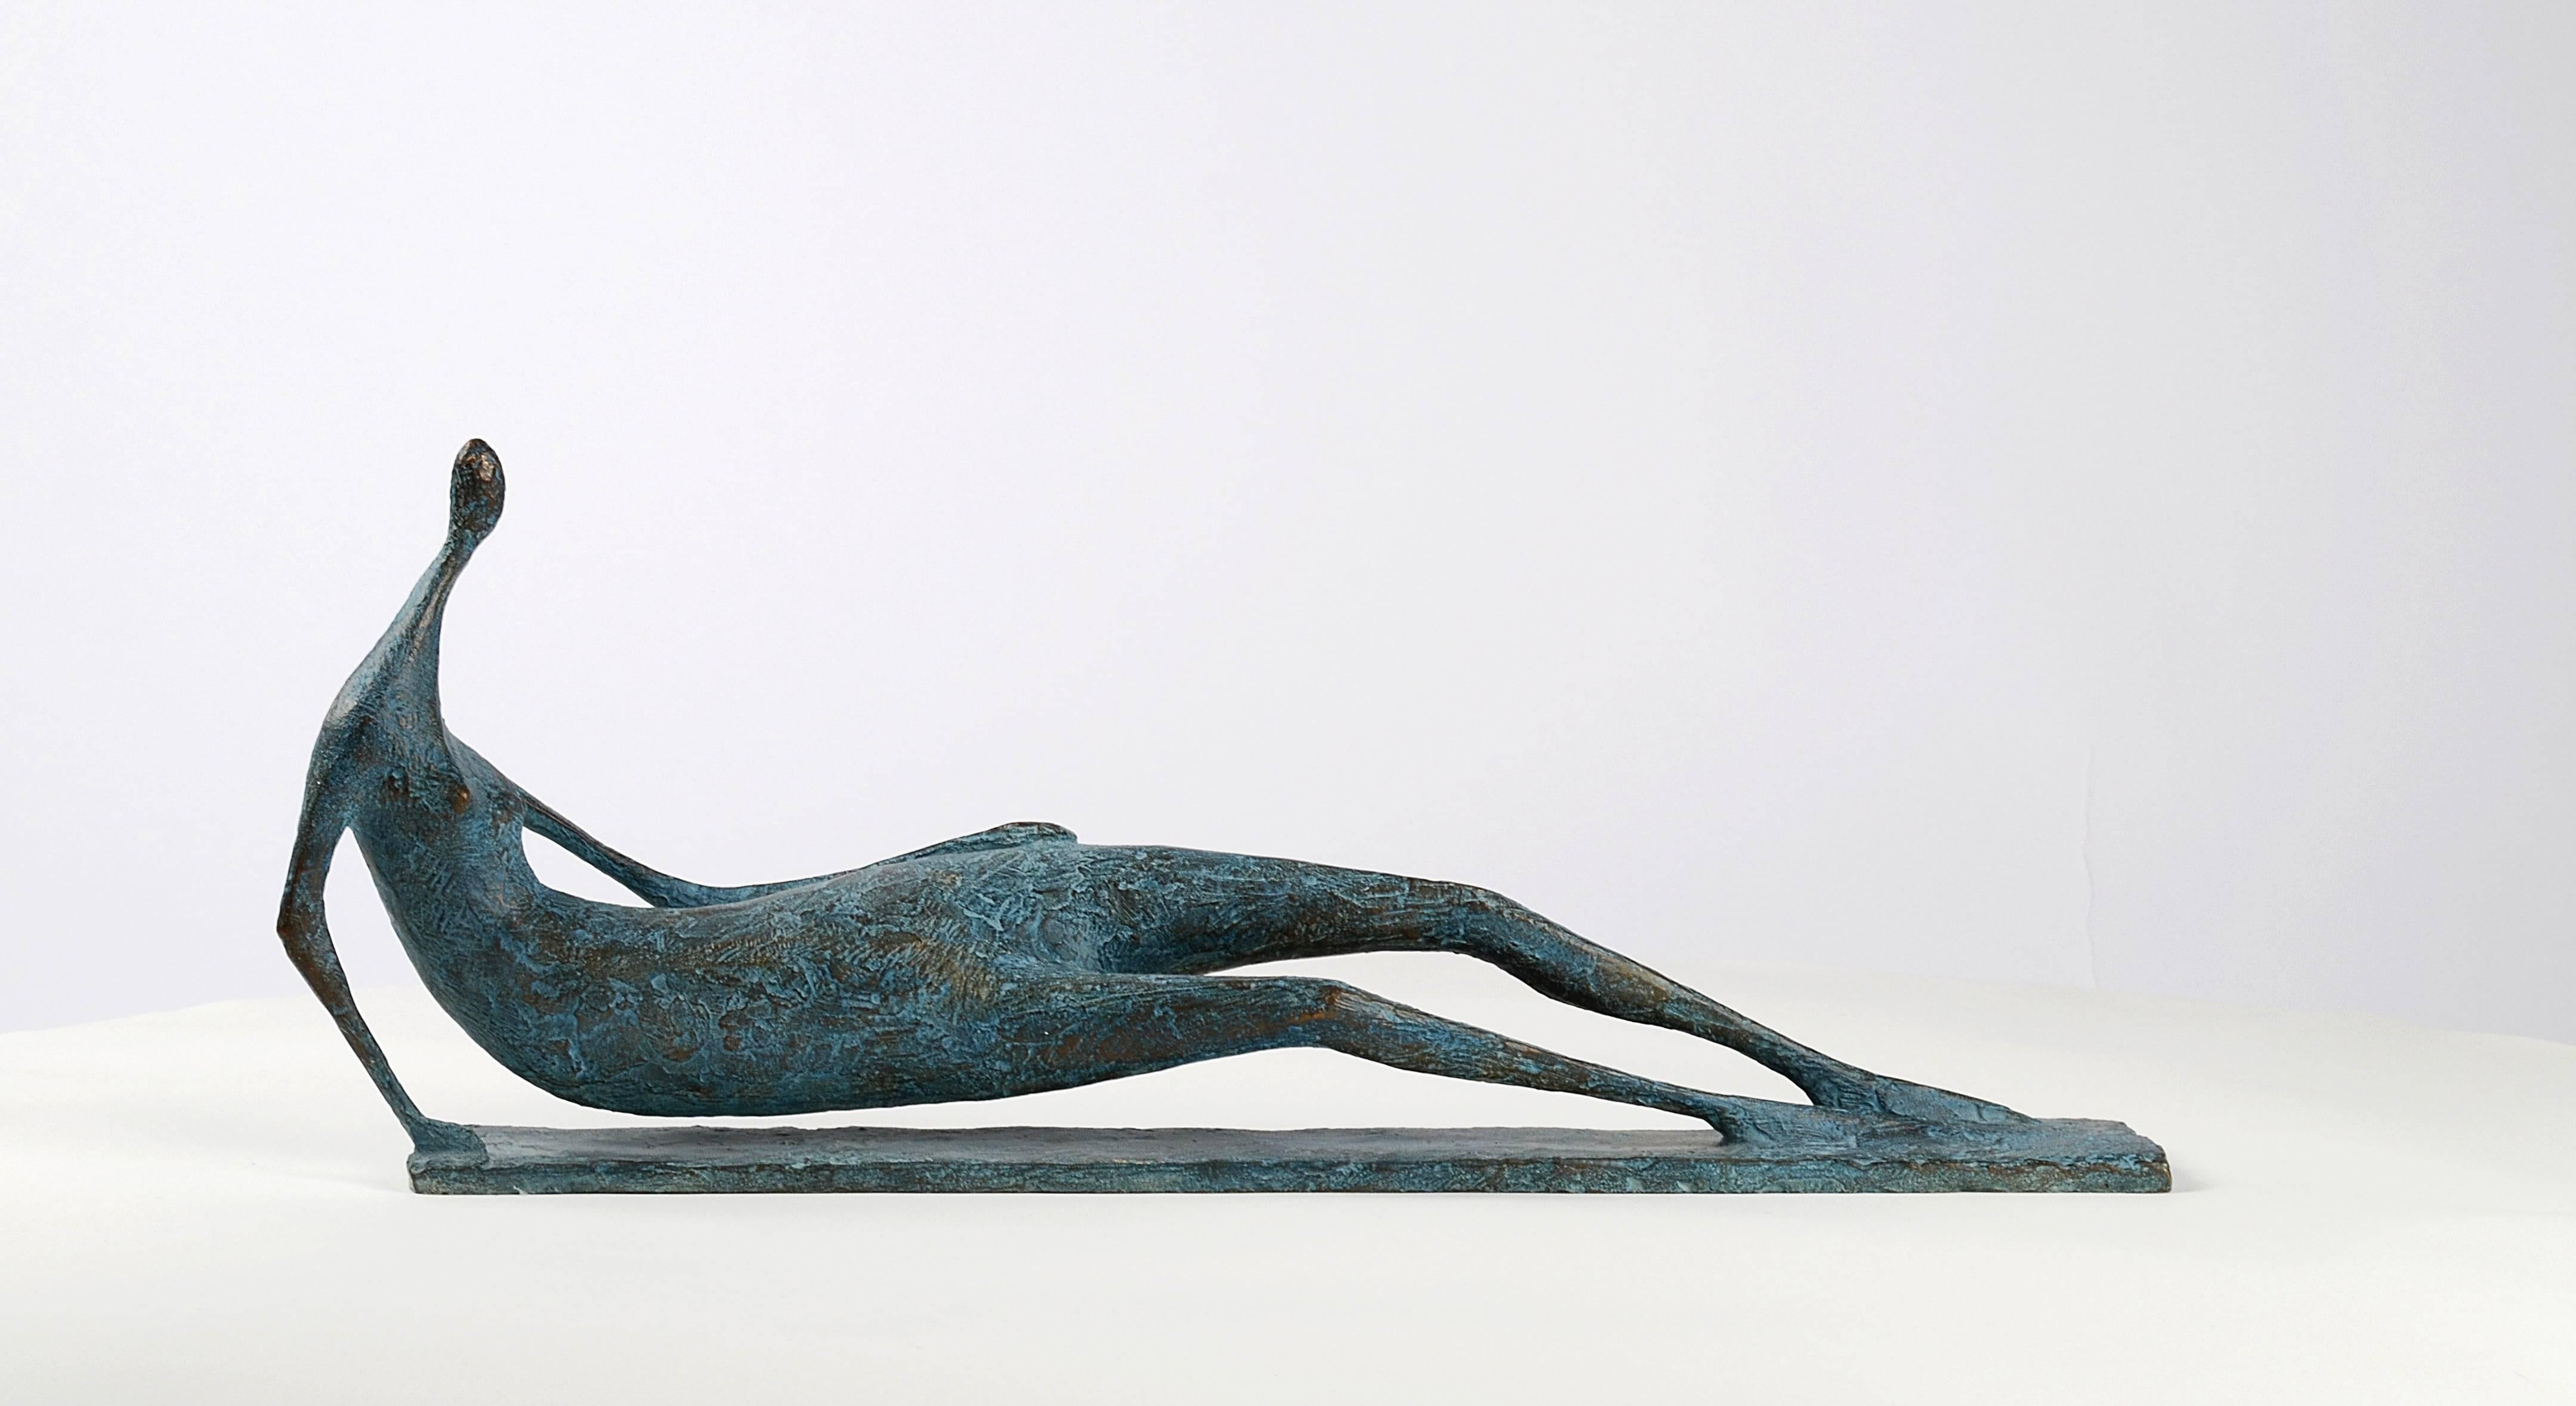 Lying Figure VI is a bronze sculpture by French contemporary artist Pierre Yermia, dimensions are 22 x 55 x 9 cm (8.7 × 21.7 × 3.5 in).  The sculpture is signed and numbered, it is part of a limited edition of 8 editions + 4 artist’s proofs, and